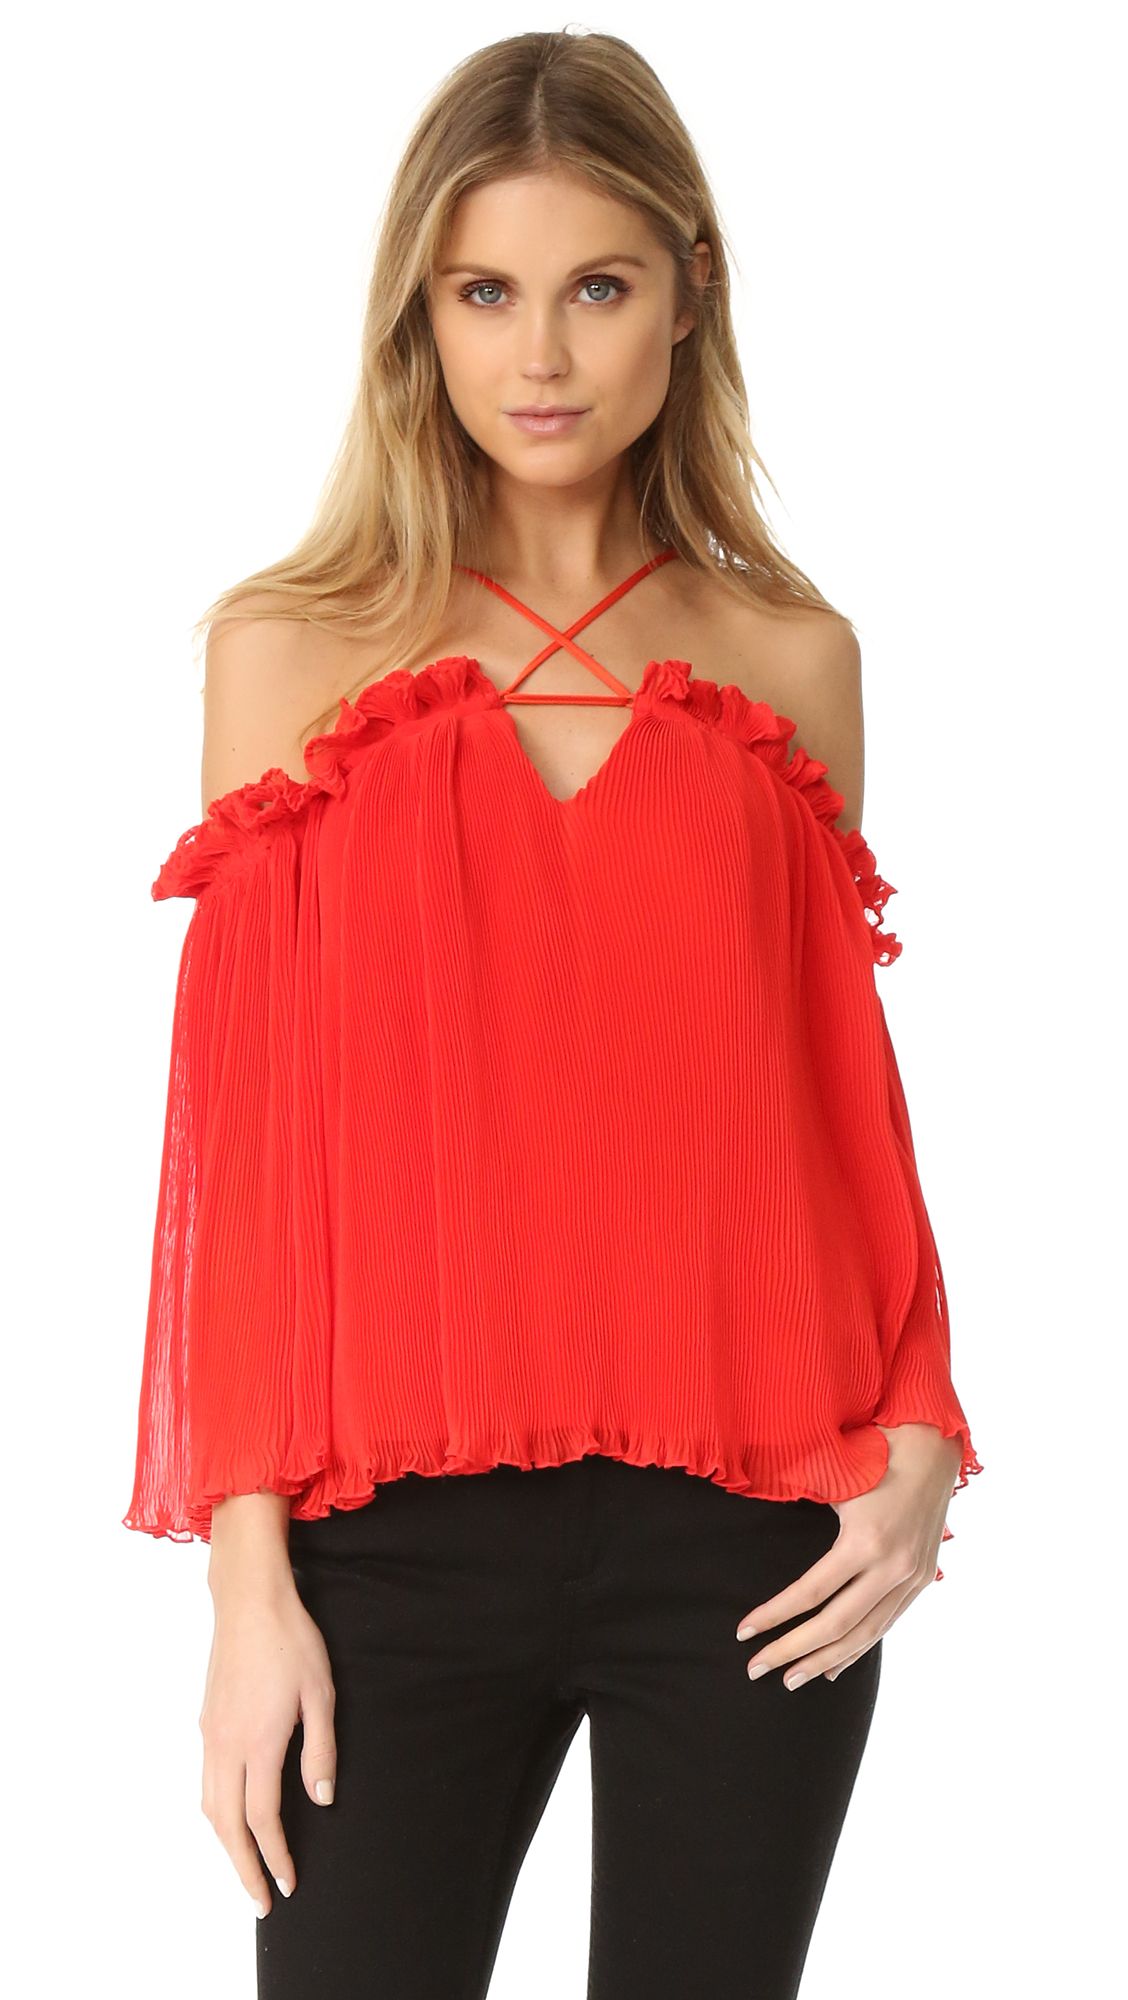 Alice Mccall What Do You Mean Top - Red | Shopbop